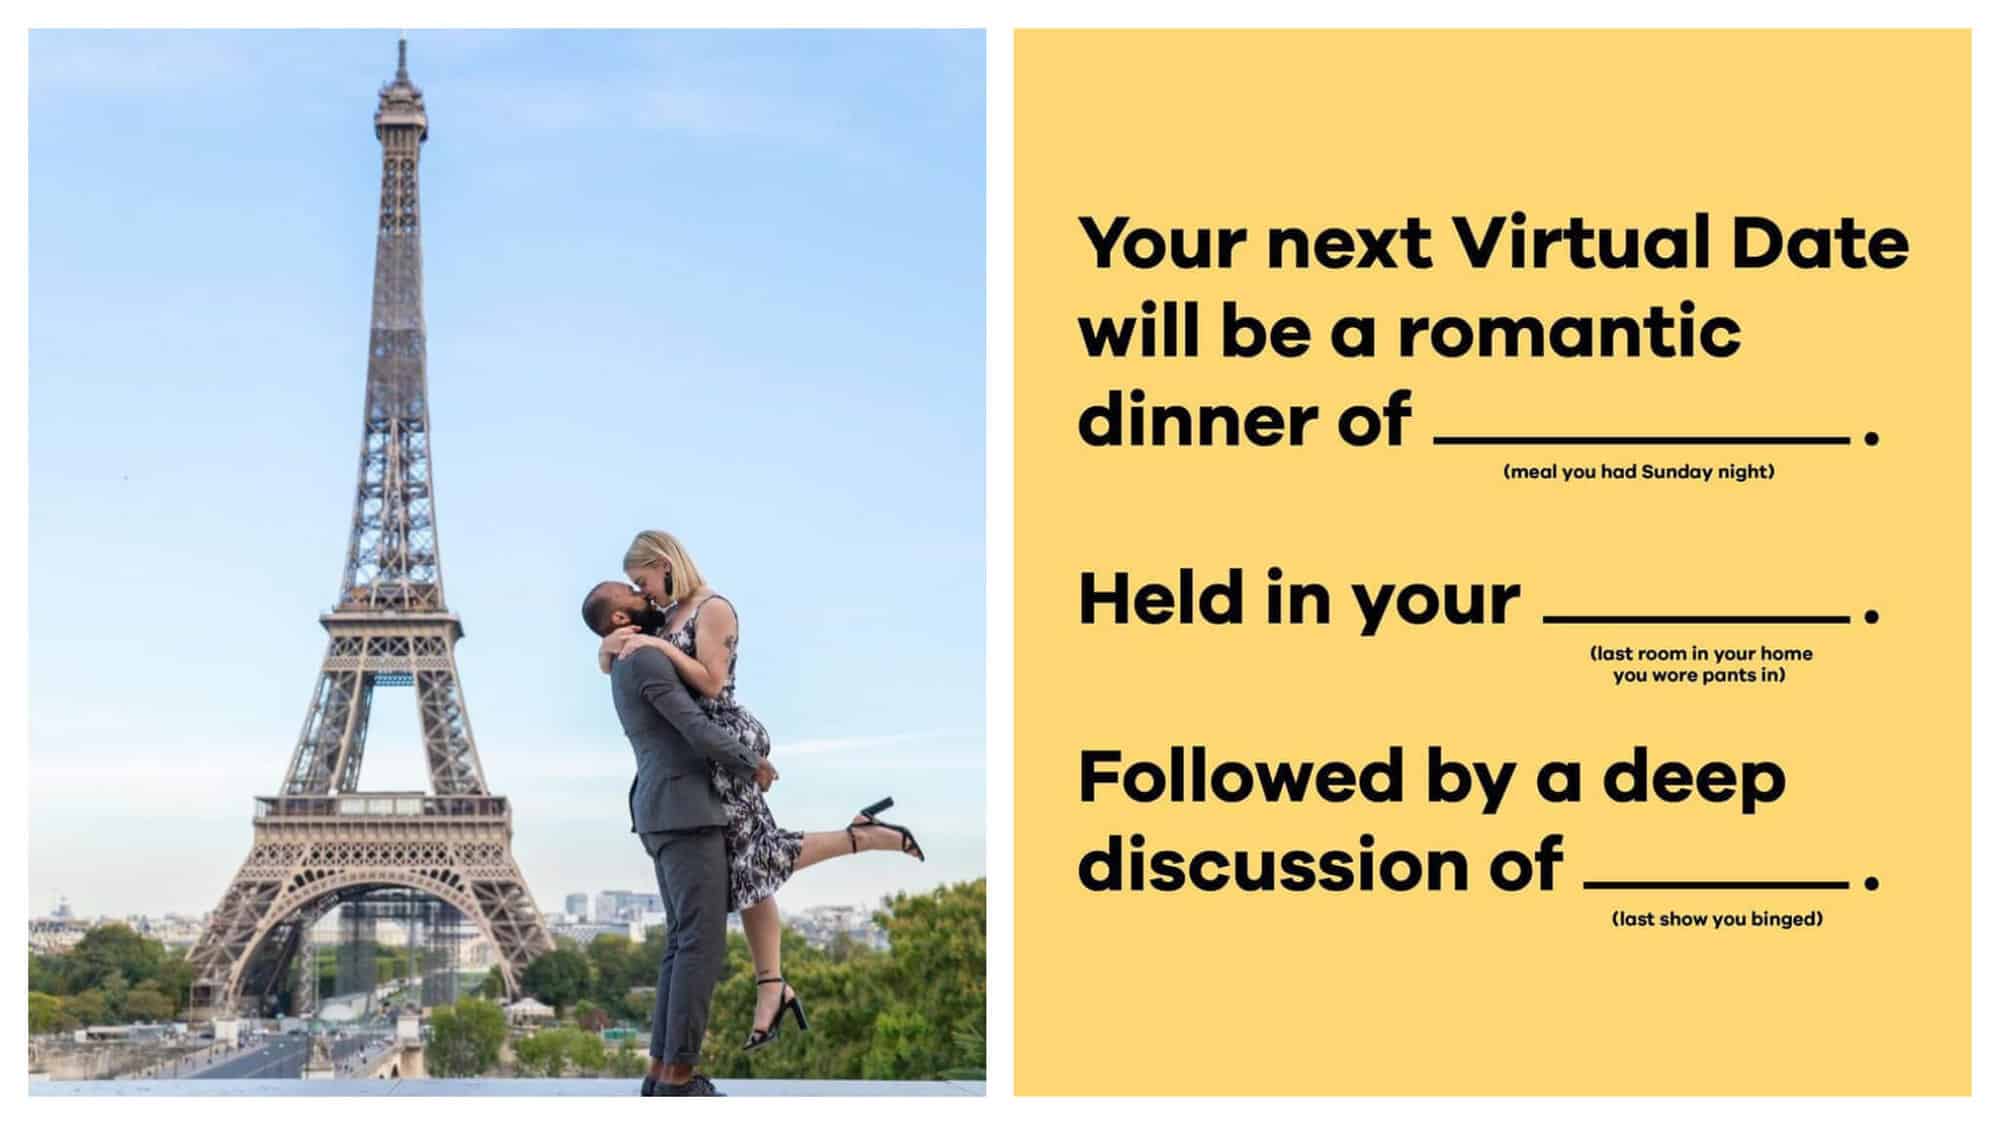 Left: a couple kissing in front of the Eiffel Tower. The man is Black and the woman is blonde. The man is lifting the woman up in his arms as they kiss. Right: A text box from the application Bumble's Instagram feed. It is a fill-in-the-blank form. The words say "Your next virtual date will be a romantic dinner of "blank."" (with the words "meal you had Sunday night" as the option to fill in). "Held in your "blank."" (With the words "last room in your home that you wore pants in.")"Followed by a deep discussion of "blank.""(with the words "last show you binged" as the option to fill in).